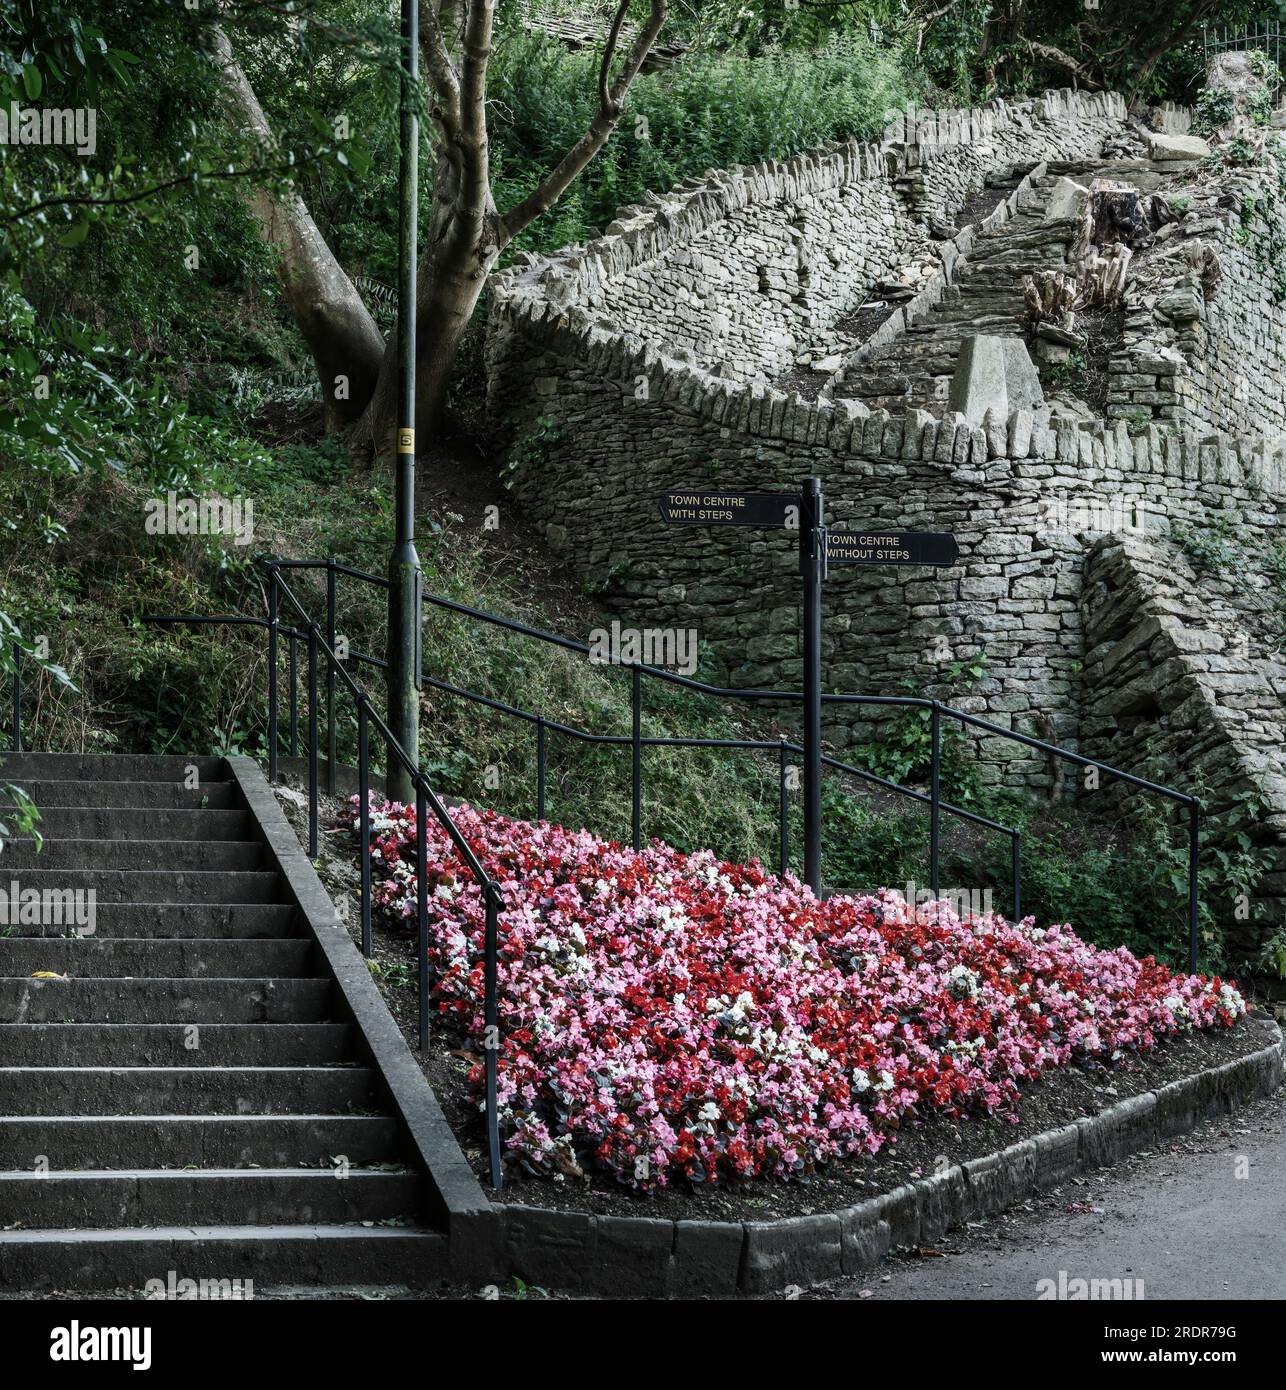 The steps that lead up to the historic abbey and town centre in the Wiltshire market town of Malmesbury. This image also shows a set of ancient steps Stock Photo